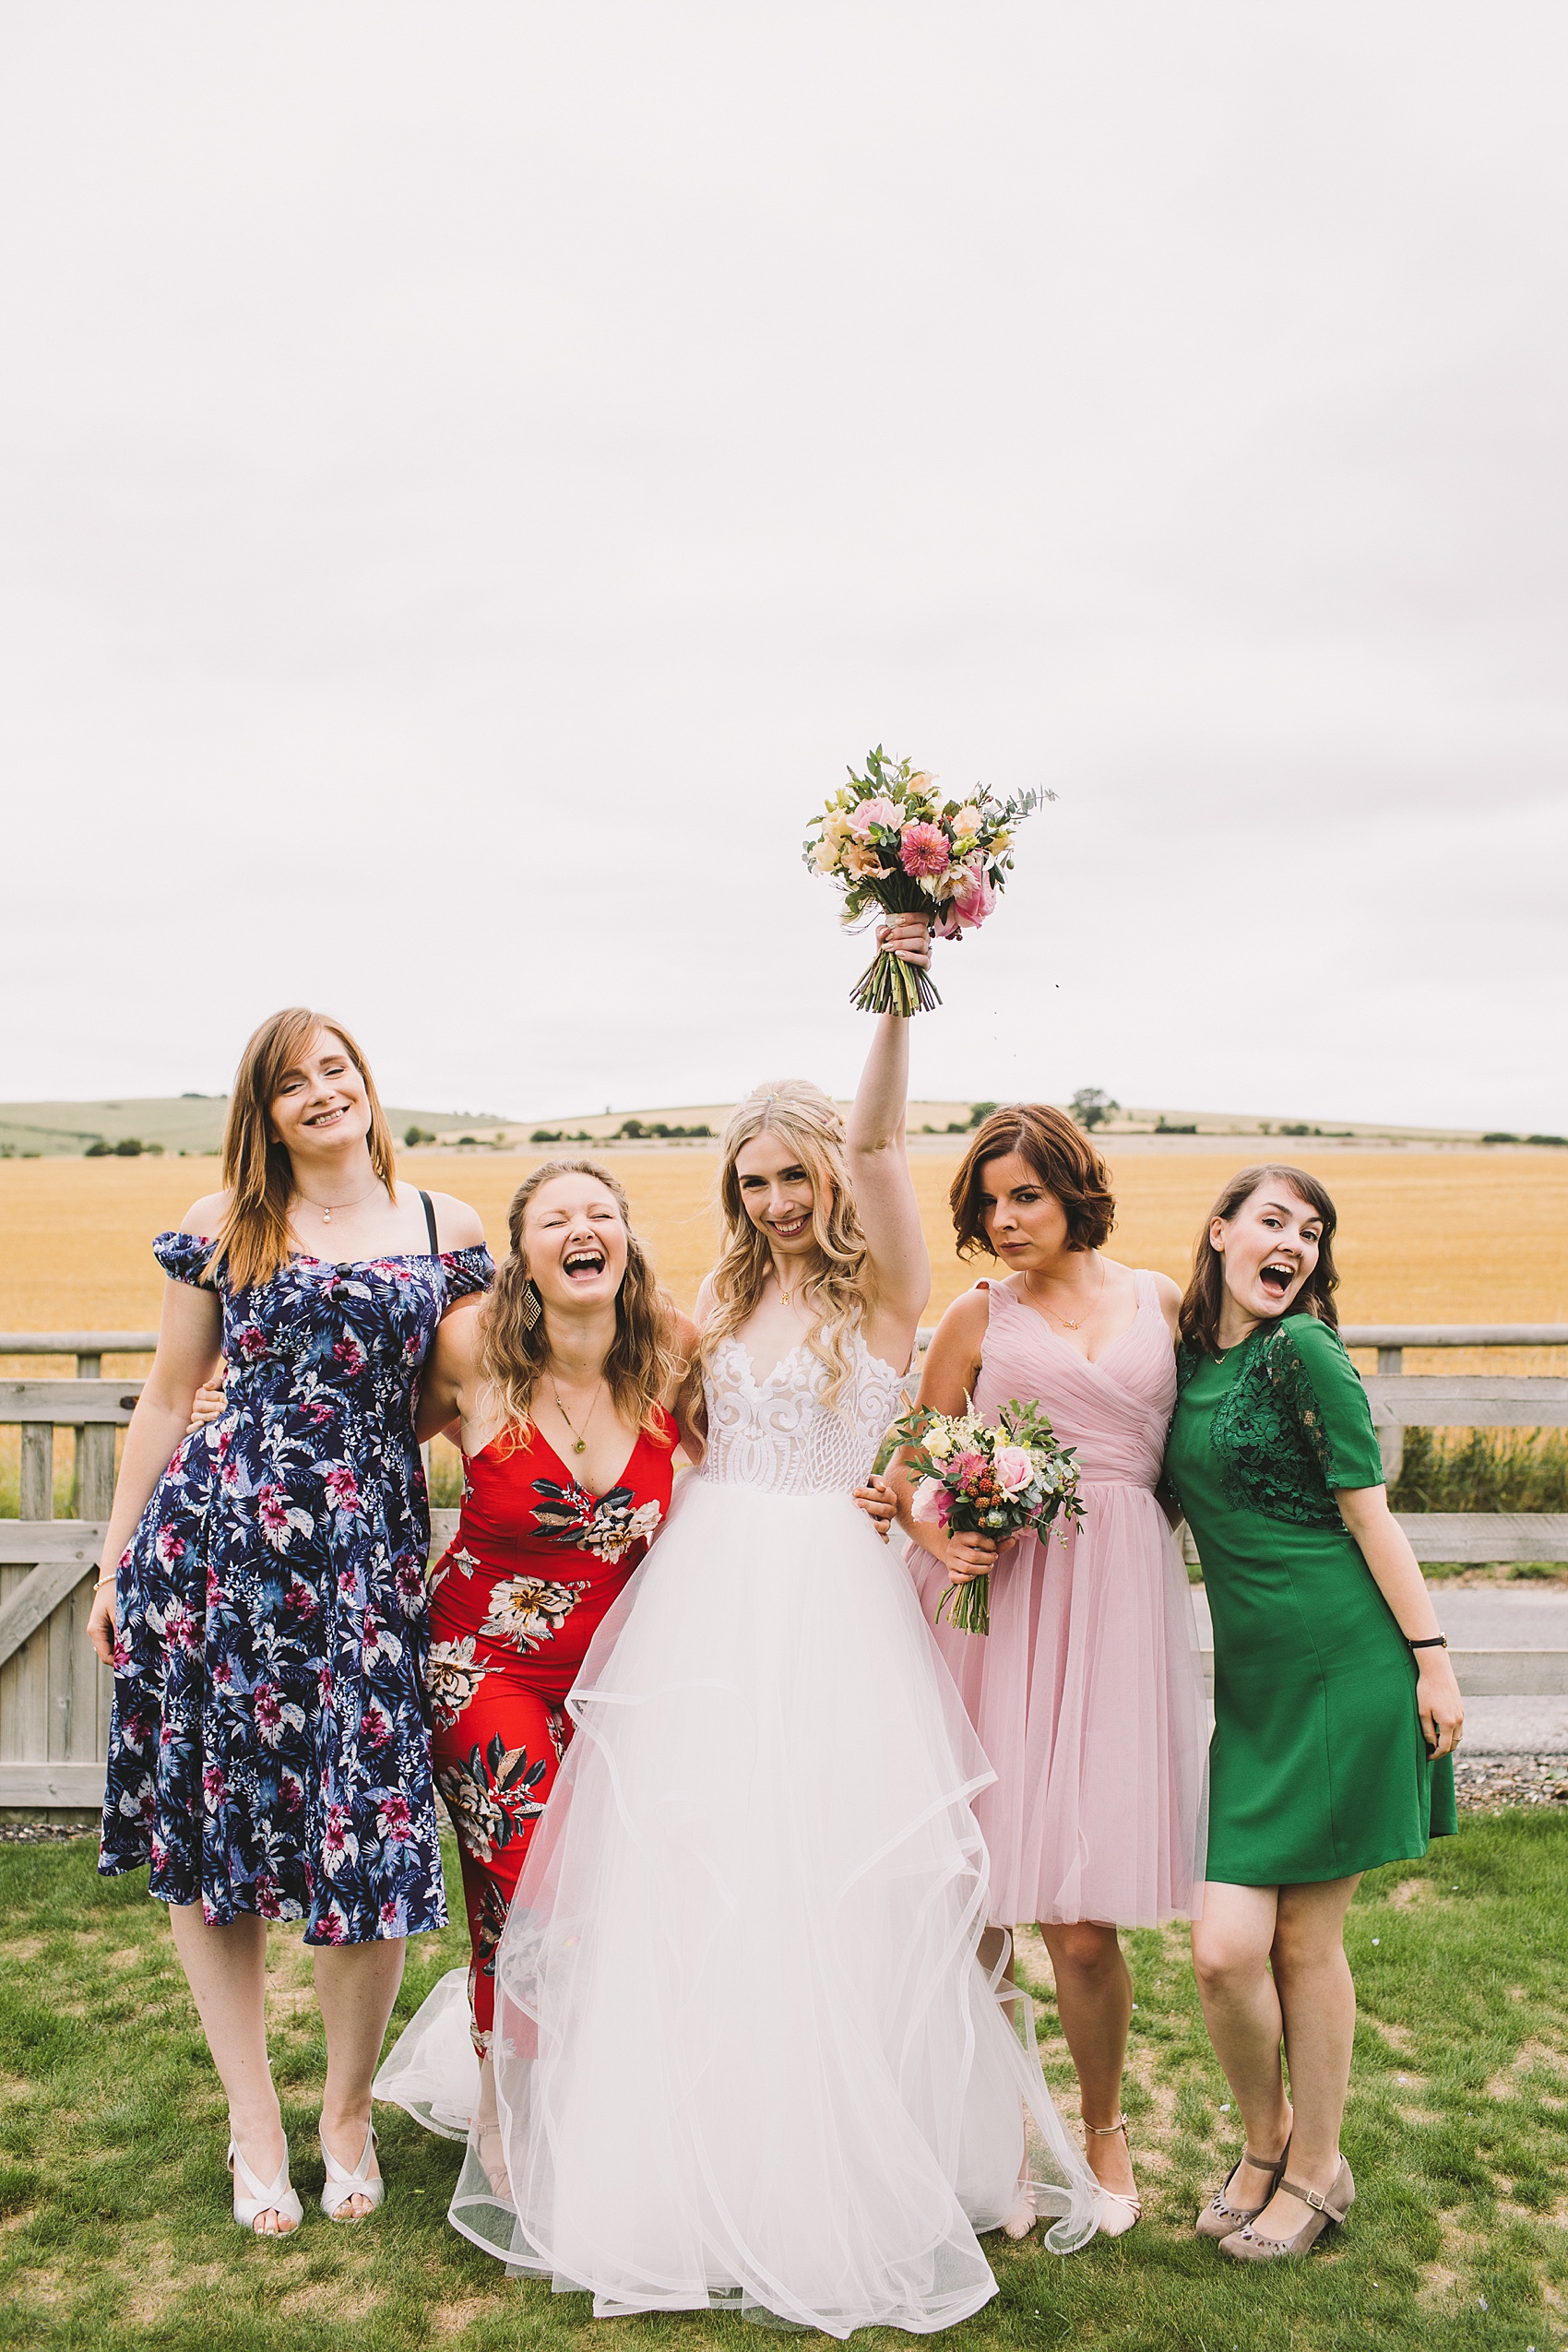 Hayley Paige tulle dress barn wedding  - A Blush Hayley Paige Dress for a Romantic + Whimsical English Country Garden Inspired Barn Wedding